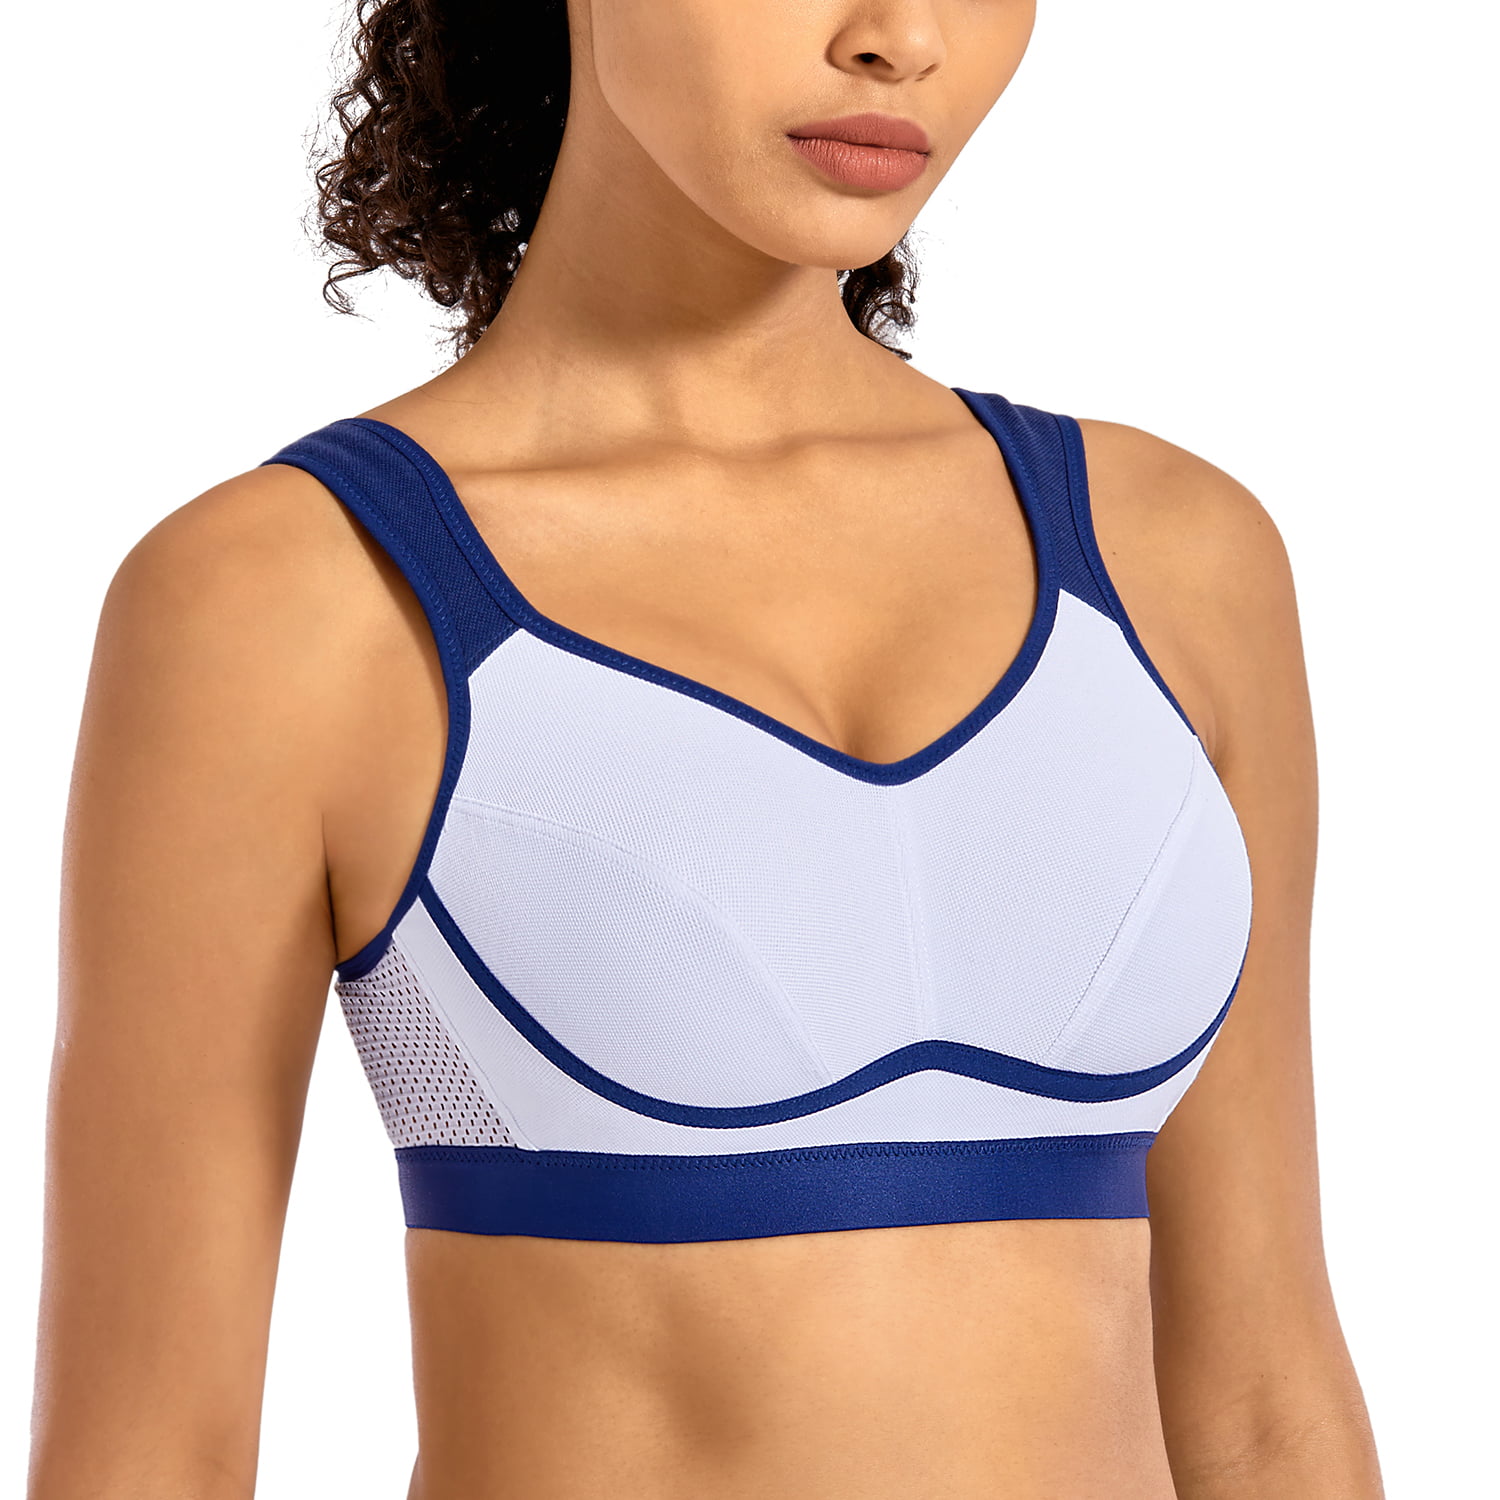 SYROKAN Womens Bounce Control Wirefree High Impact Maximum Support Sports Bra 